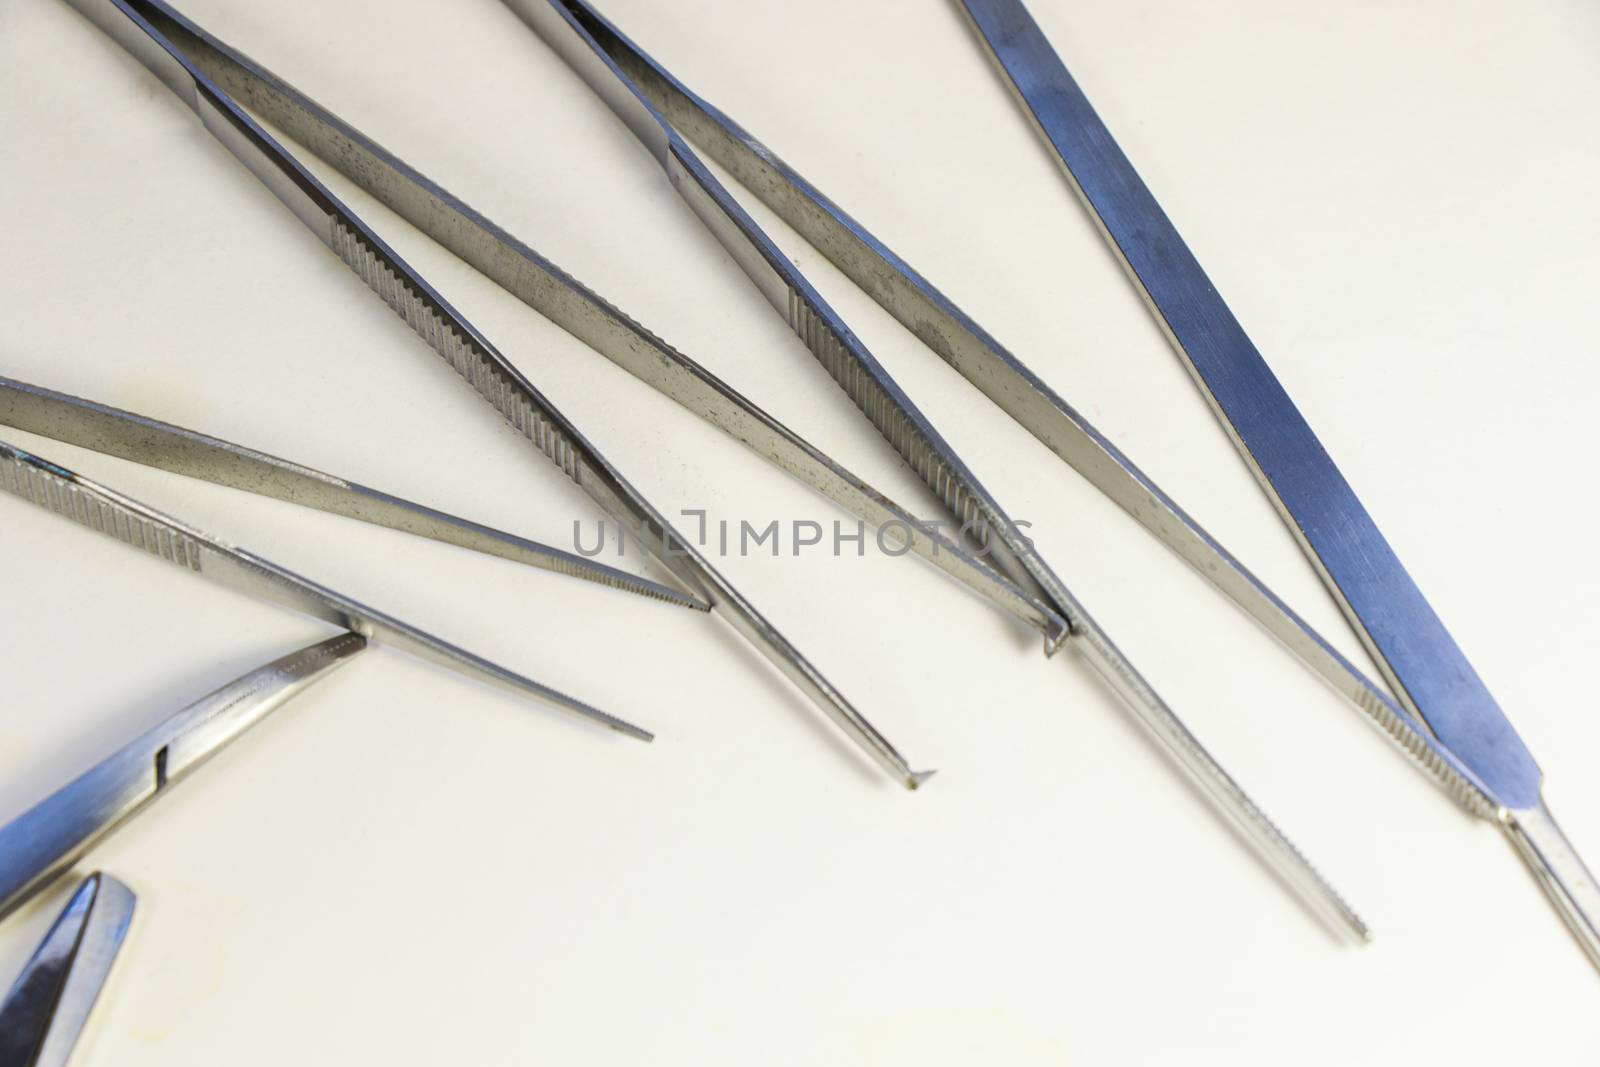 Dissection Kit - Premium Quality Stainless Steel Tools for Medical Students of Anatomy, Biology, Veterinary, Marine Biology with Scalpel Blades Included for Dissecting Frogs. Surgery instruments. Pincers.